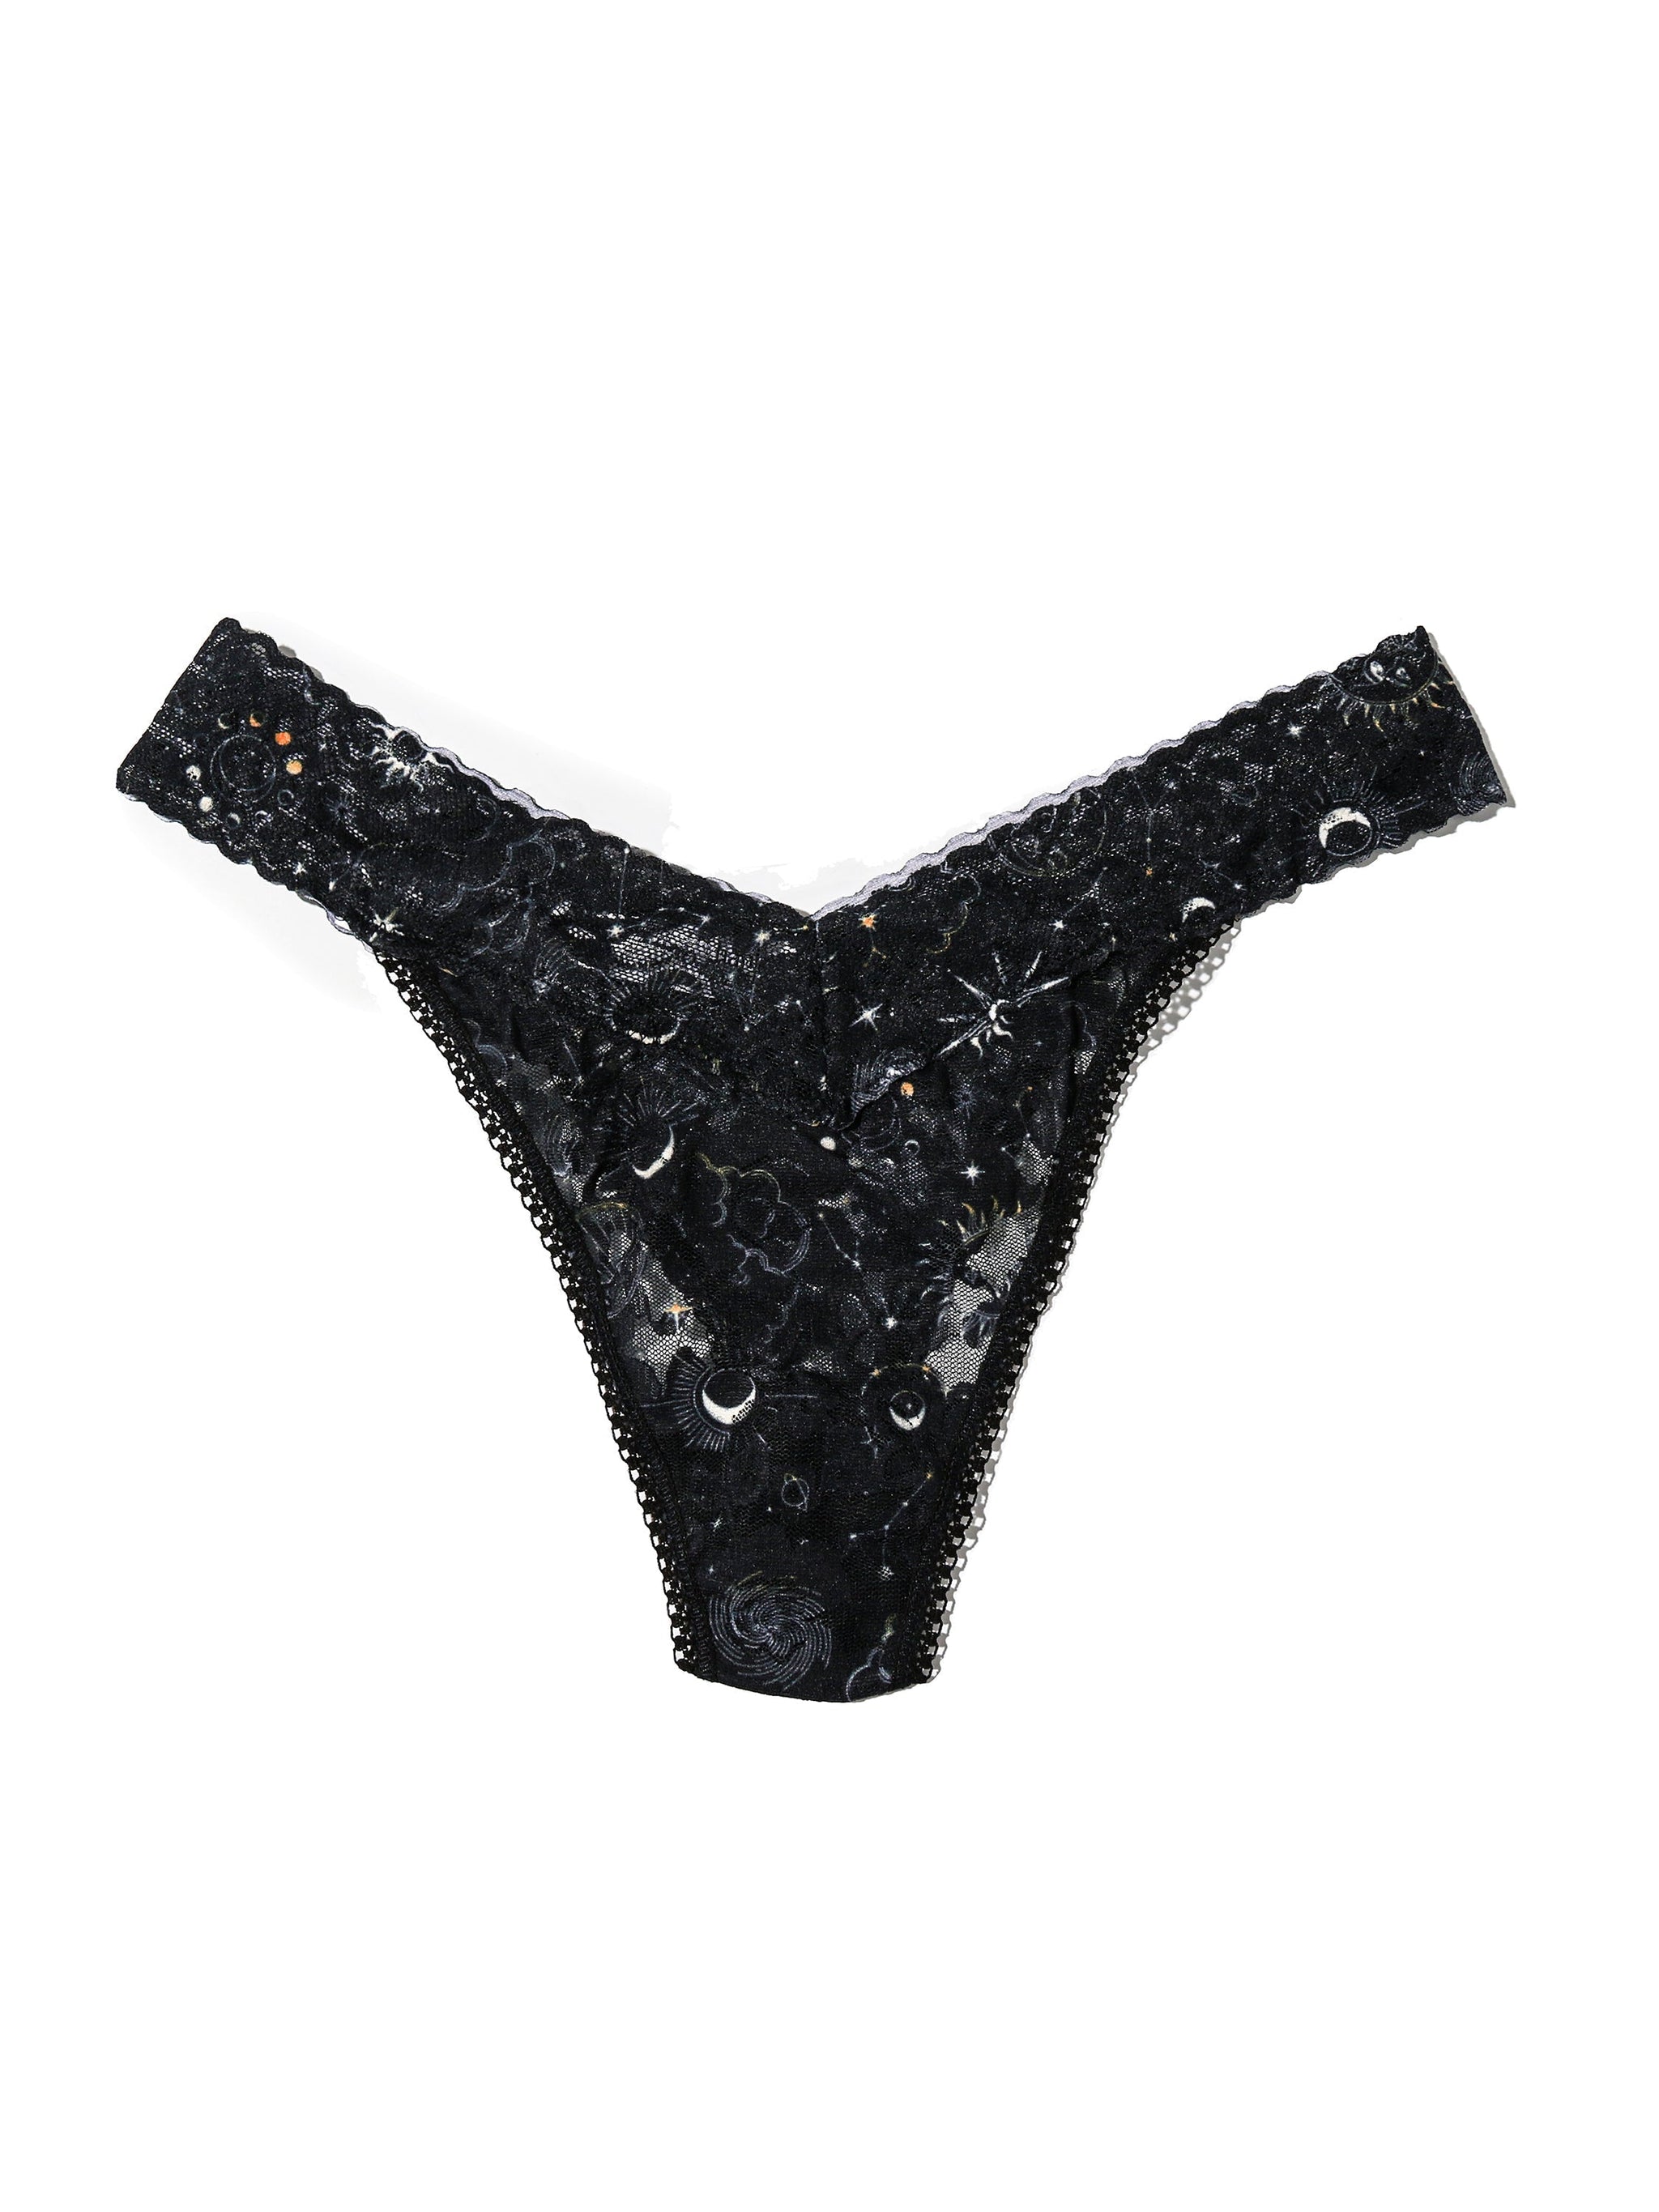 Printed Daily Lace™ Original Rise Thong Constellation Sale